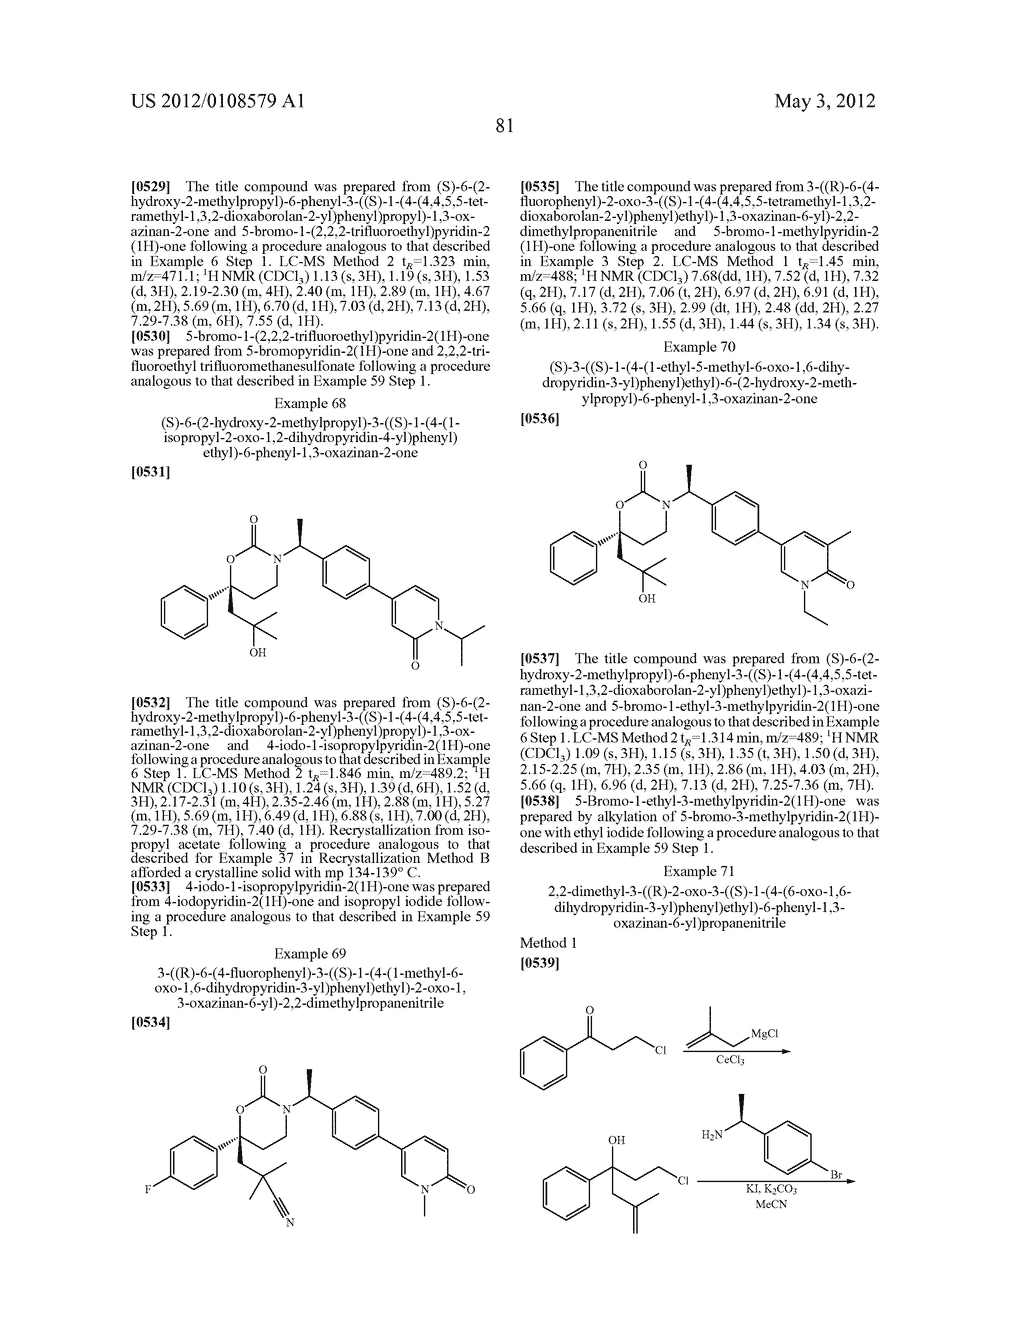 CYCLIC INHIBITORS OF 11BETA-HYDROXYSTEROID DEHYDROGENASE 1 - diagram, schematic, and image 84